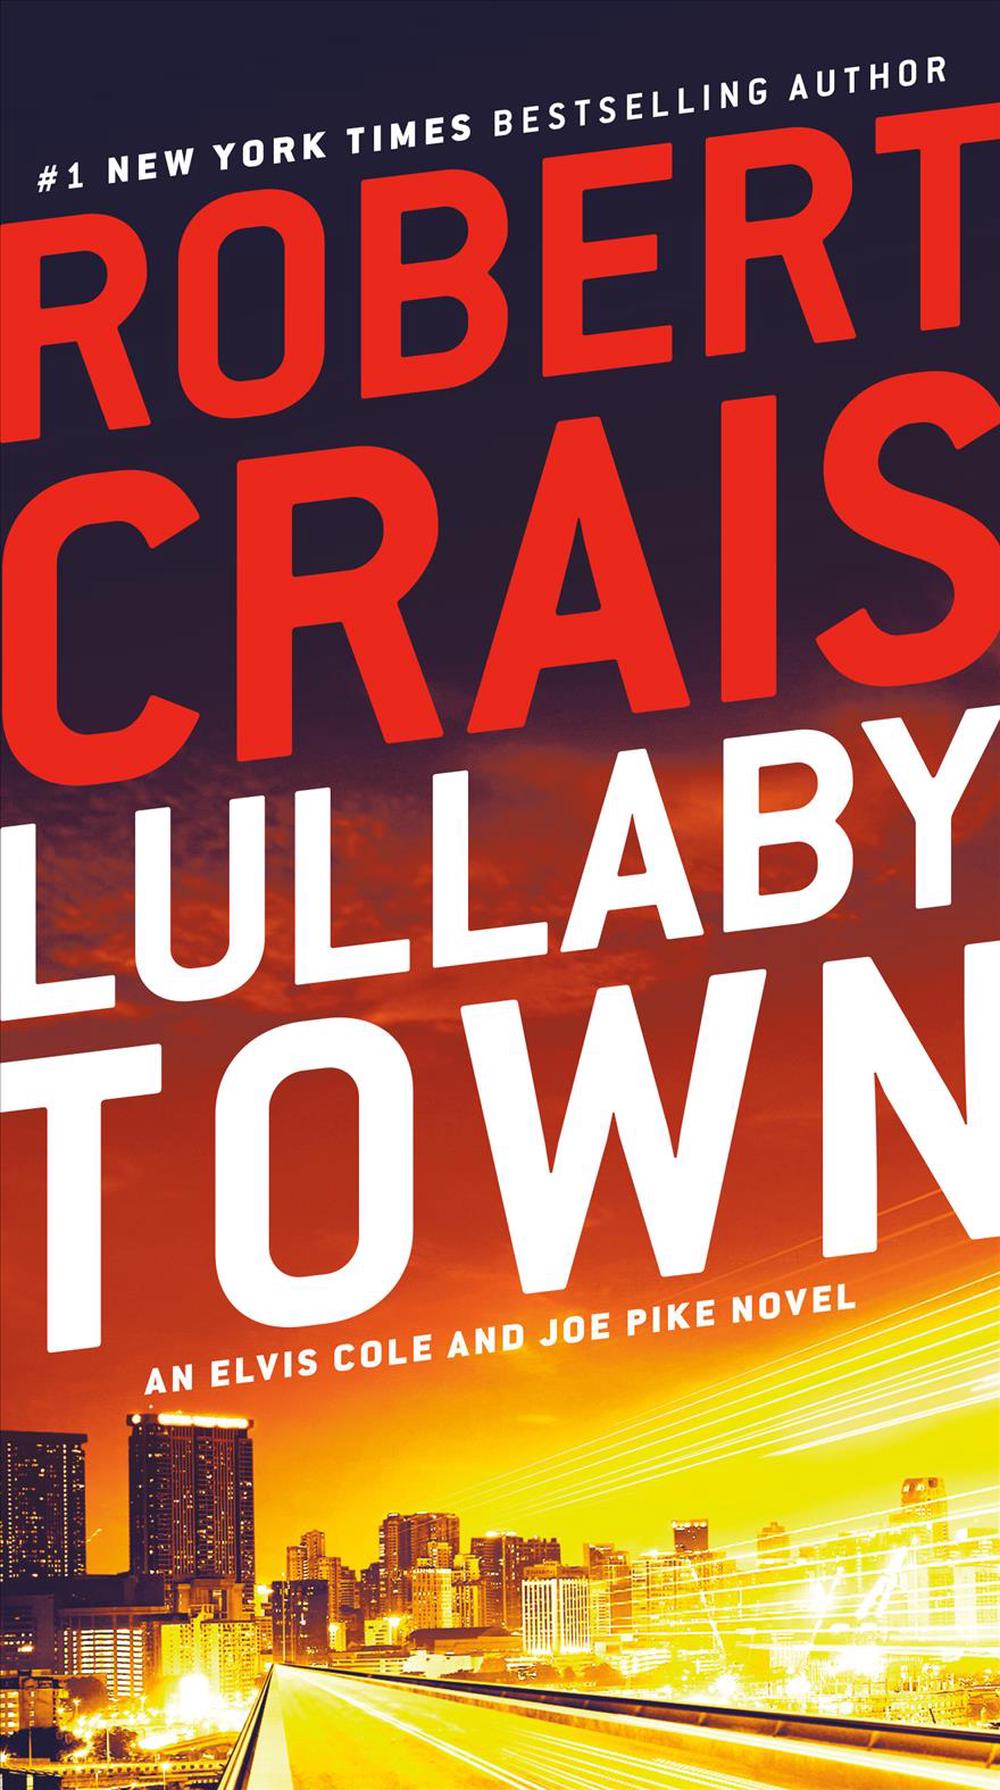 Lullaby Town An Elvis Cole And Joe Pike Novel By Robert